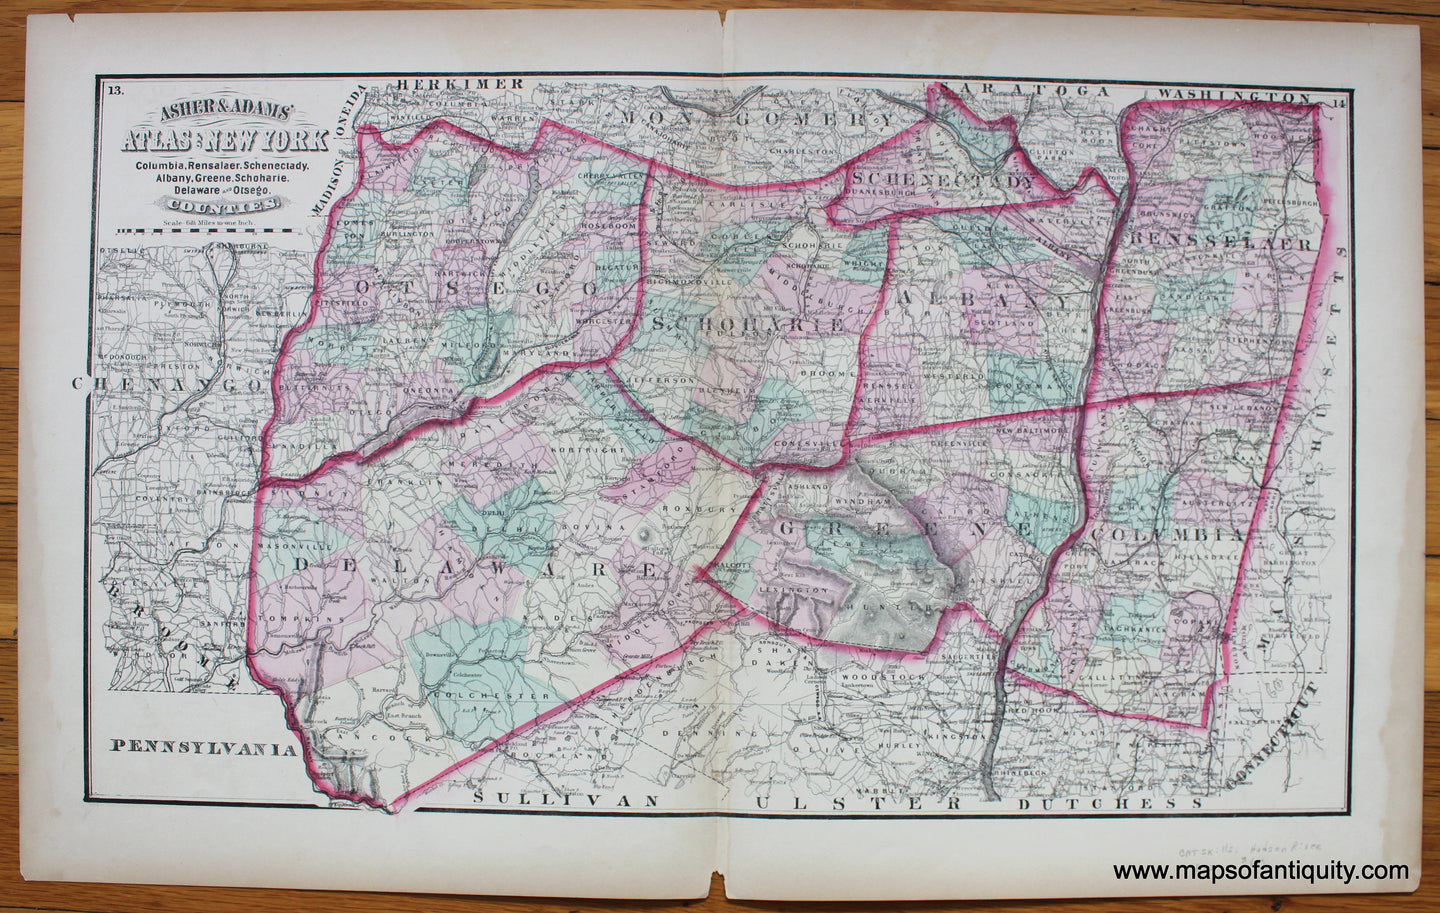 Antique-Hand-Colored-Map-Columbia-Rensalaer-Schenectady-Albany-Greene-Schoharie-Delaware-and-Otsego-Counties-NY-1872-Asher-&-Adams-New-York-1800s-19th-century-Maps-of-Antiquity